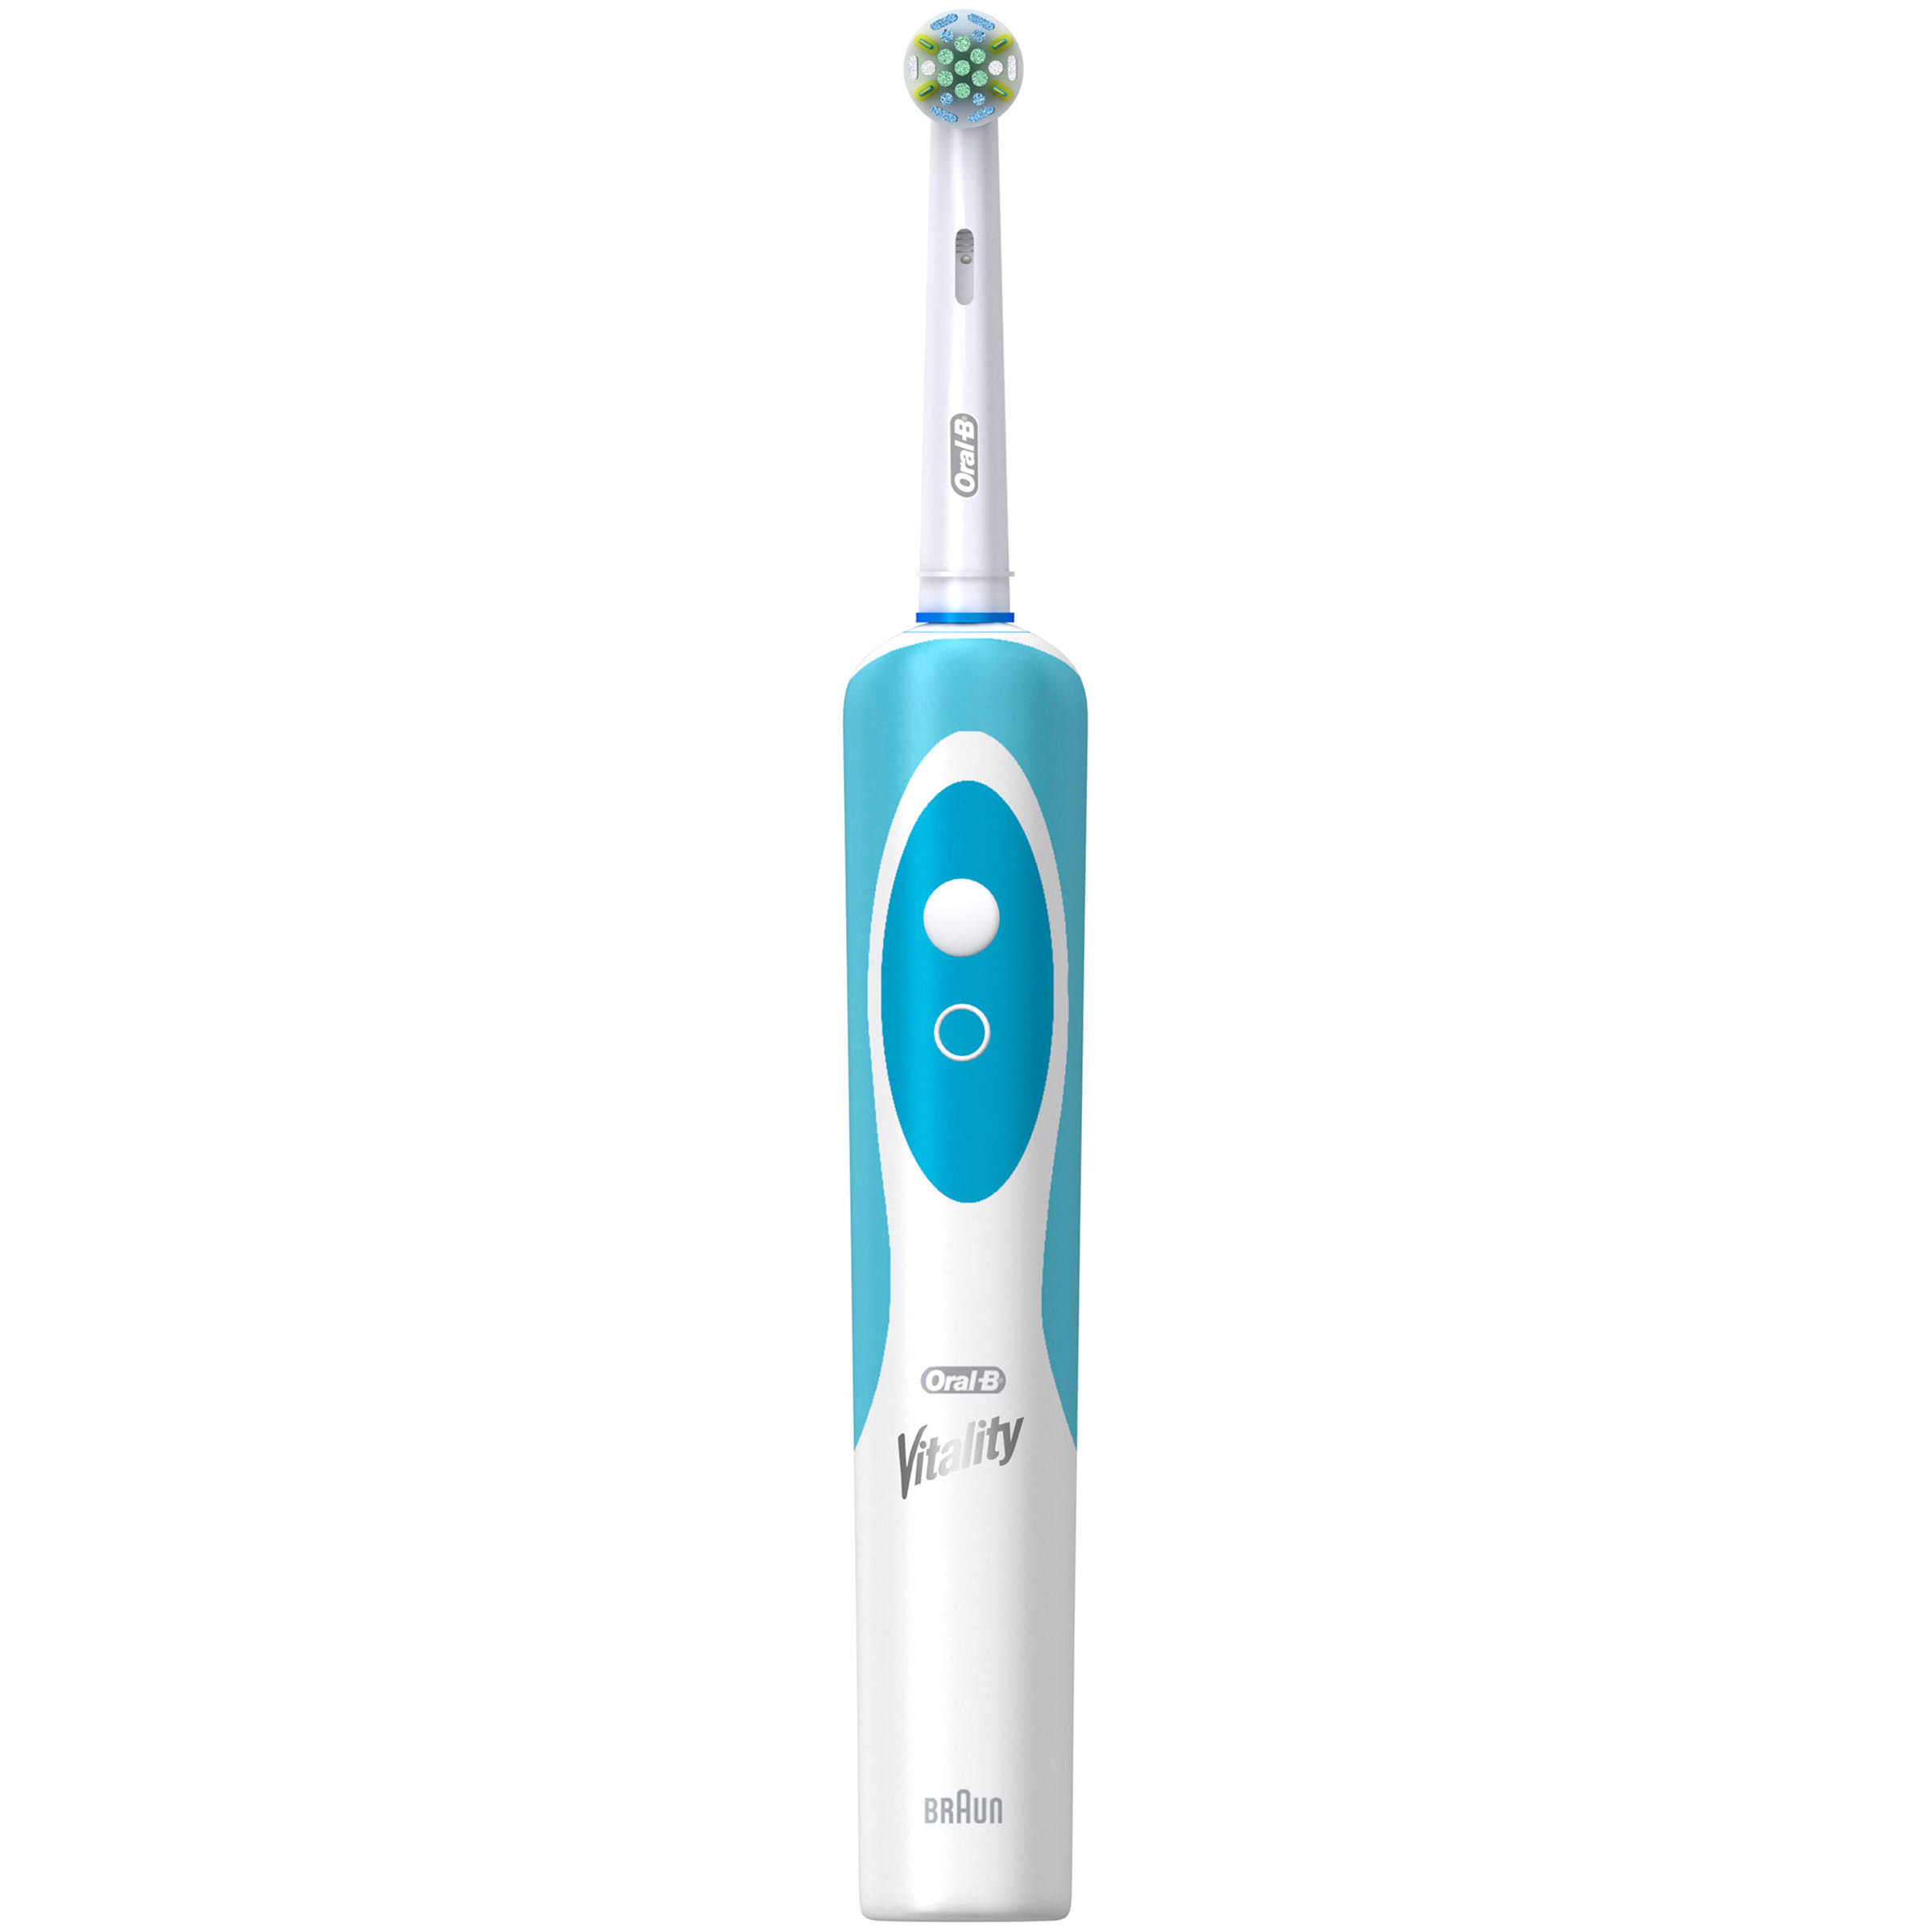 Oral-B Vitality Floss Action Rechargeable Electric Toothbrush, White/Blue